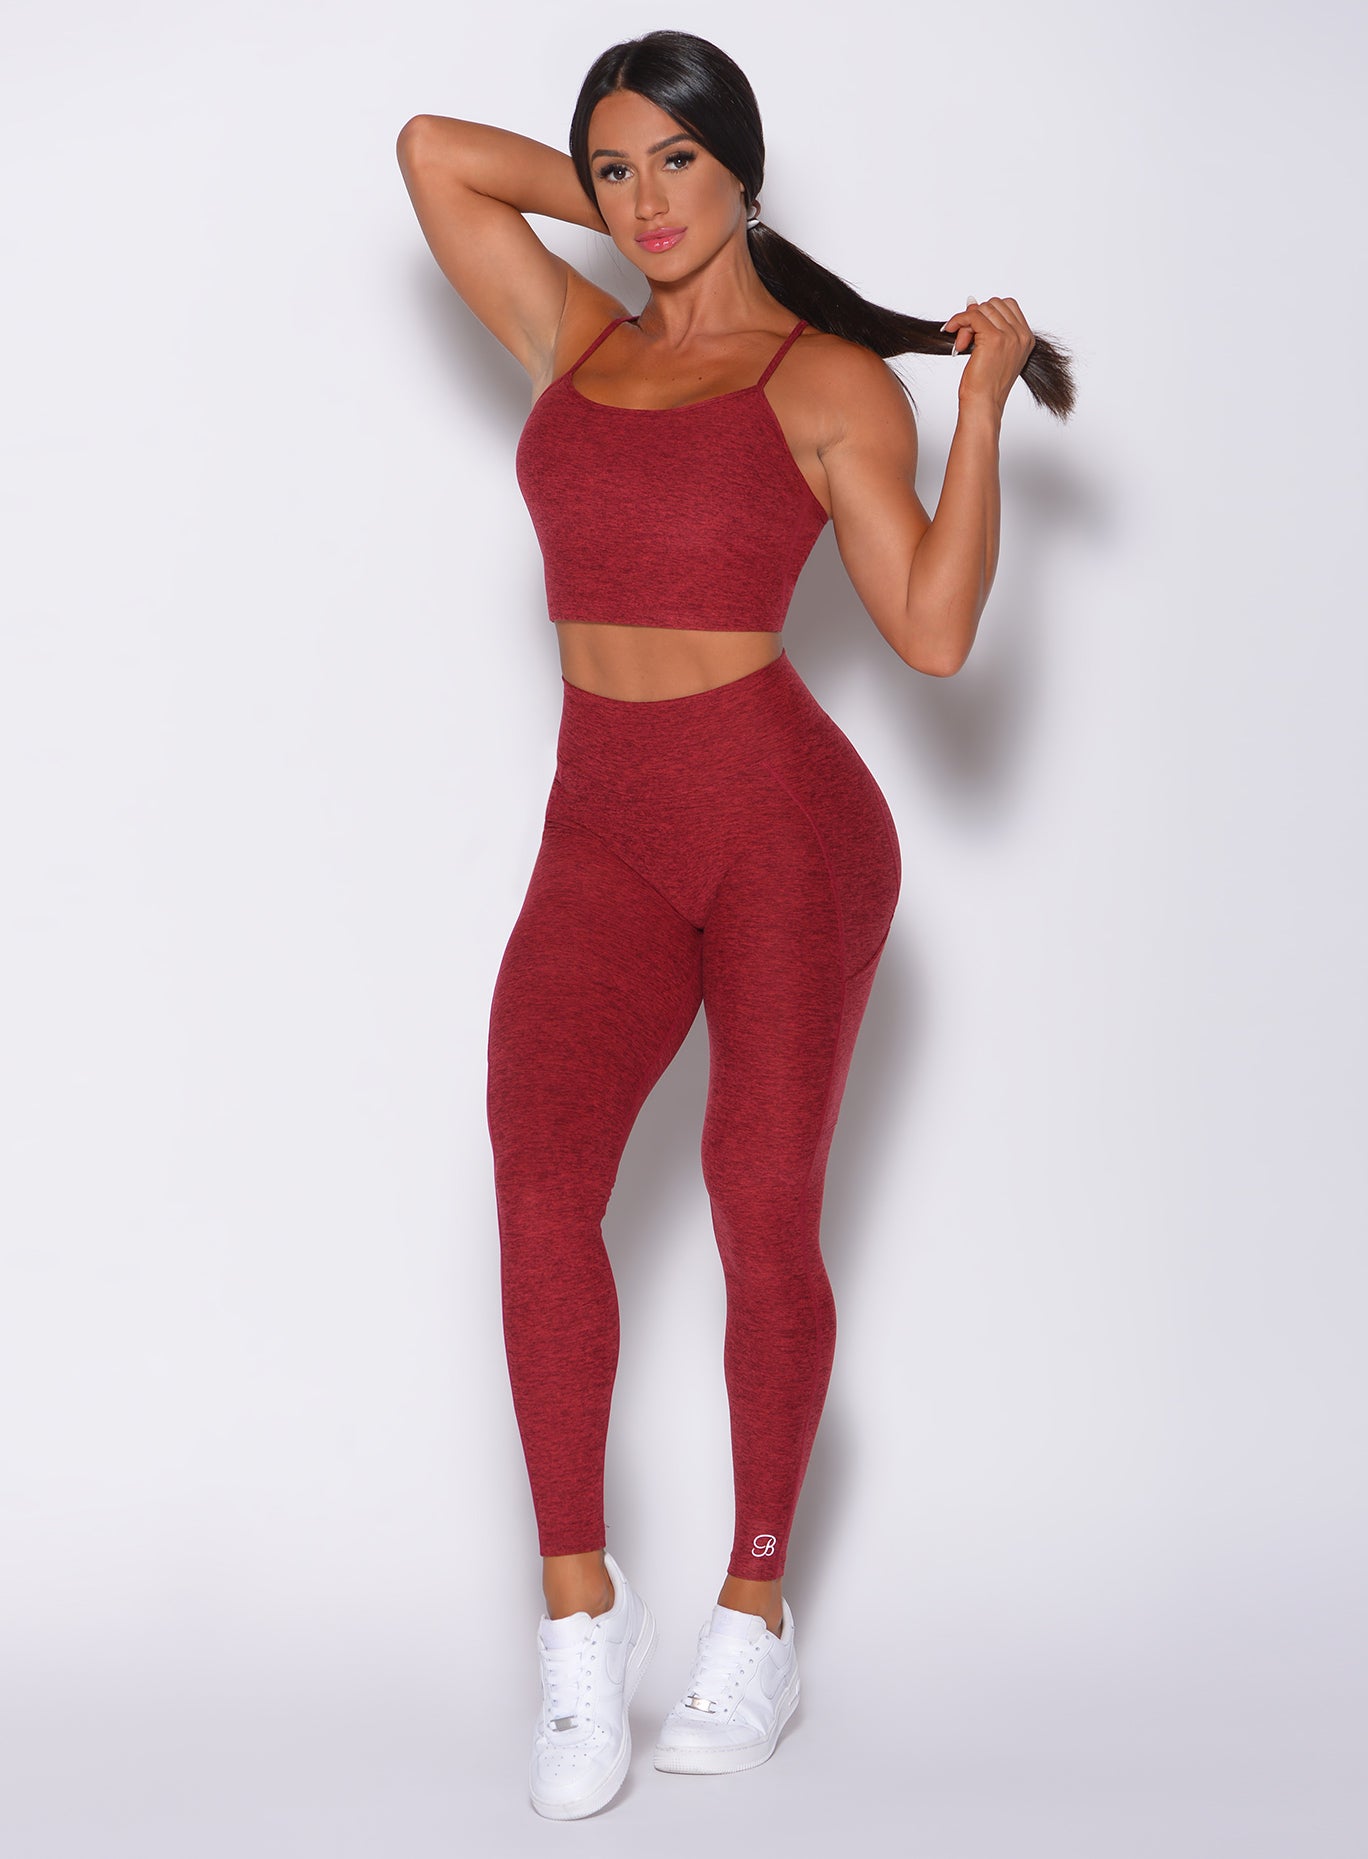 Bombshell Sportswear - It's That Time! Where you tell our